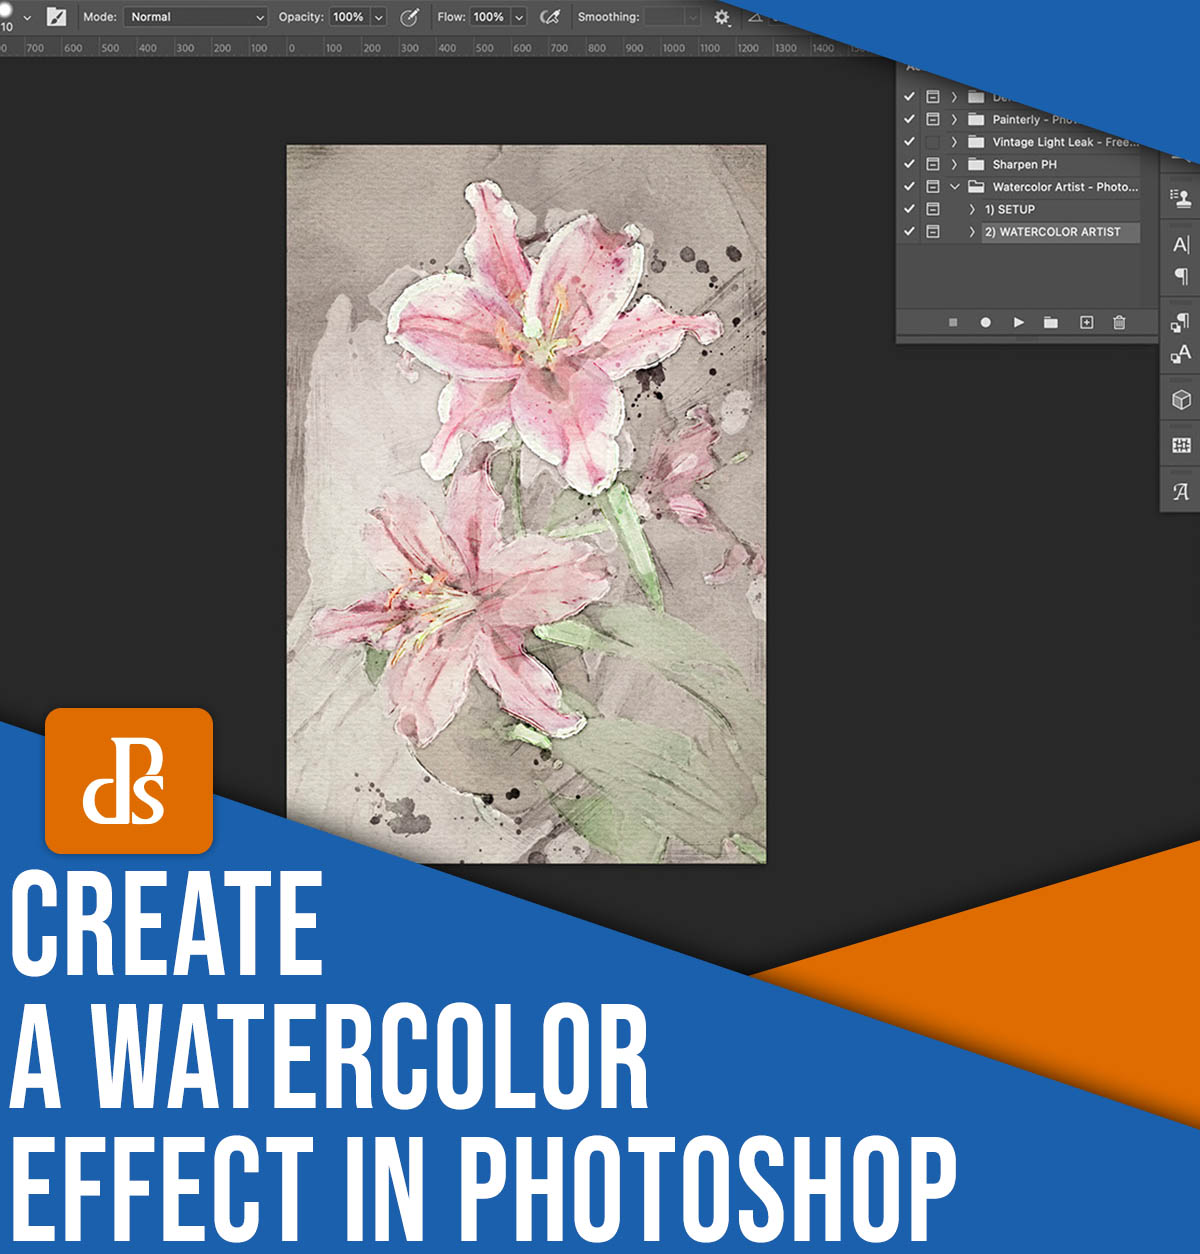 Create a watercolor effect in Photoshop